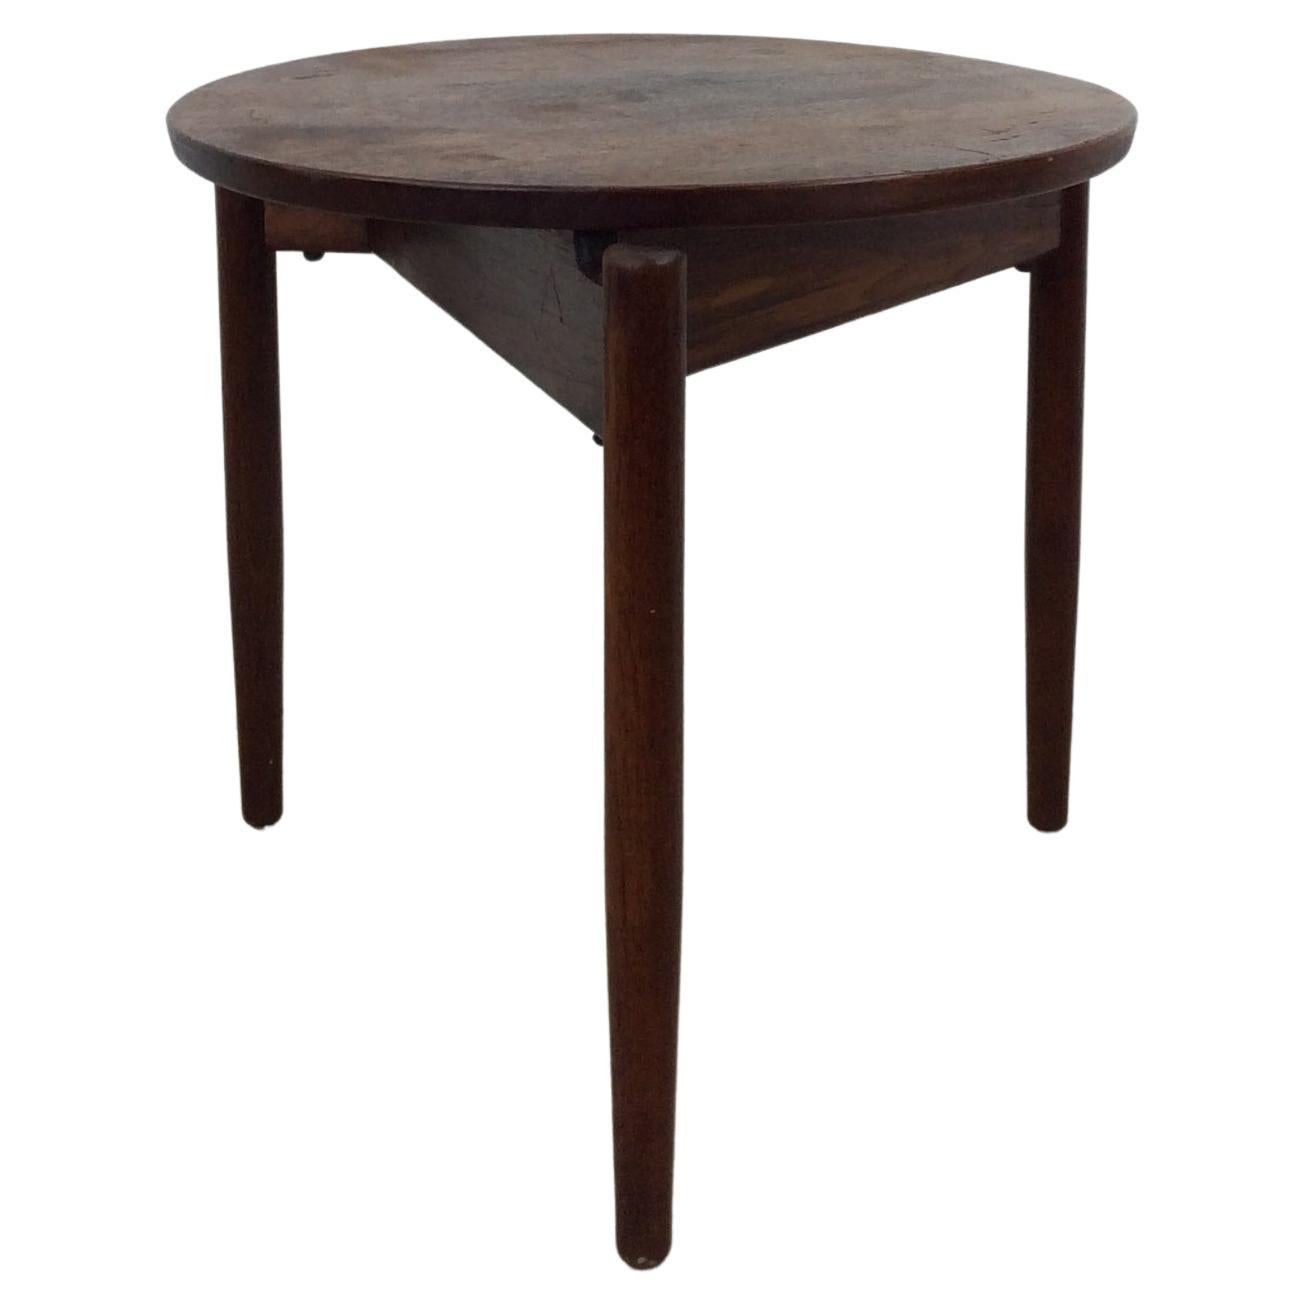 Danish Modern Round End Table / Stool For Sale